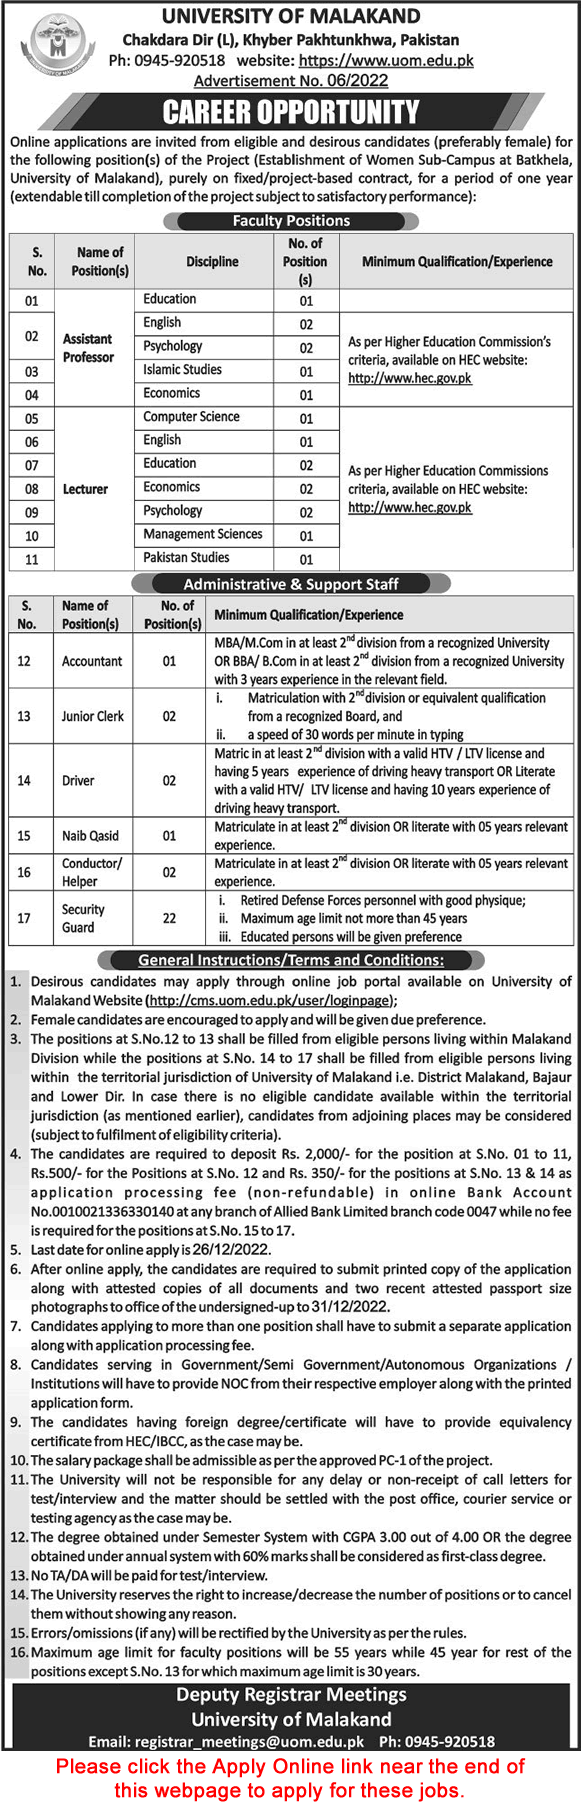 University of Malakand Jobs December 2022 Online Apply Teaching Faculty, Security Guards & Others Latest